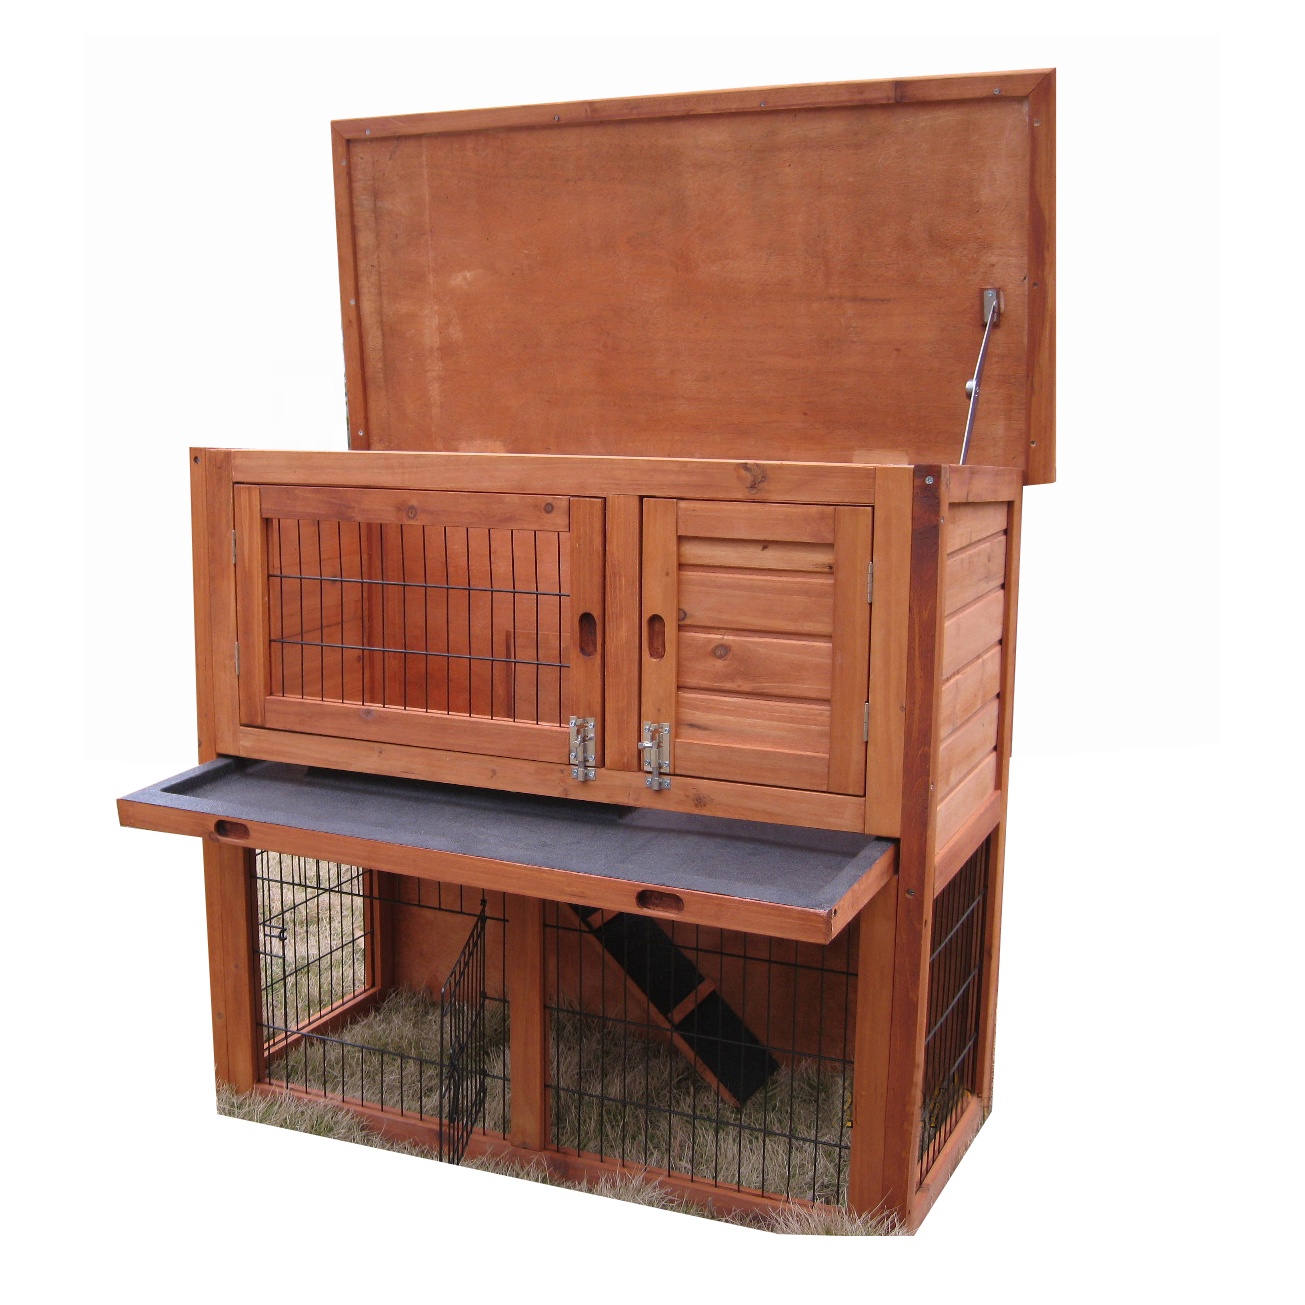 Factory Outdoor Wooden Indoor Rabbit Hutch Elevated Cage Habitat with Enclosed Run Wheels Ideal Rabbits Guinea Pig home